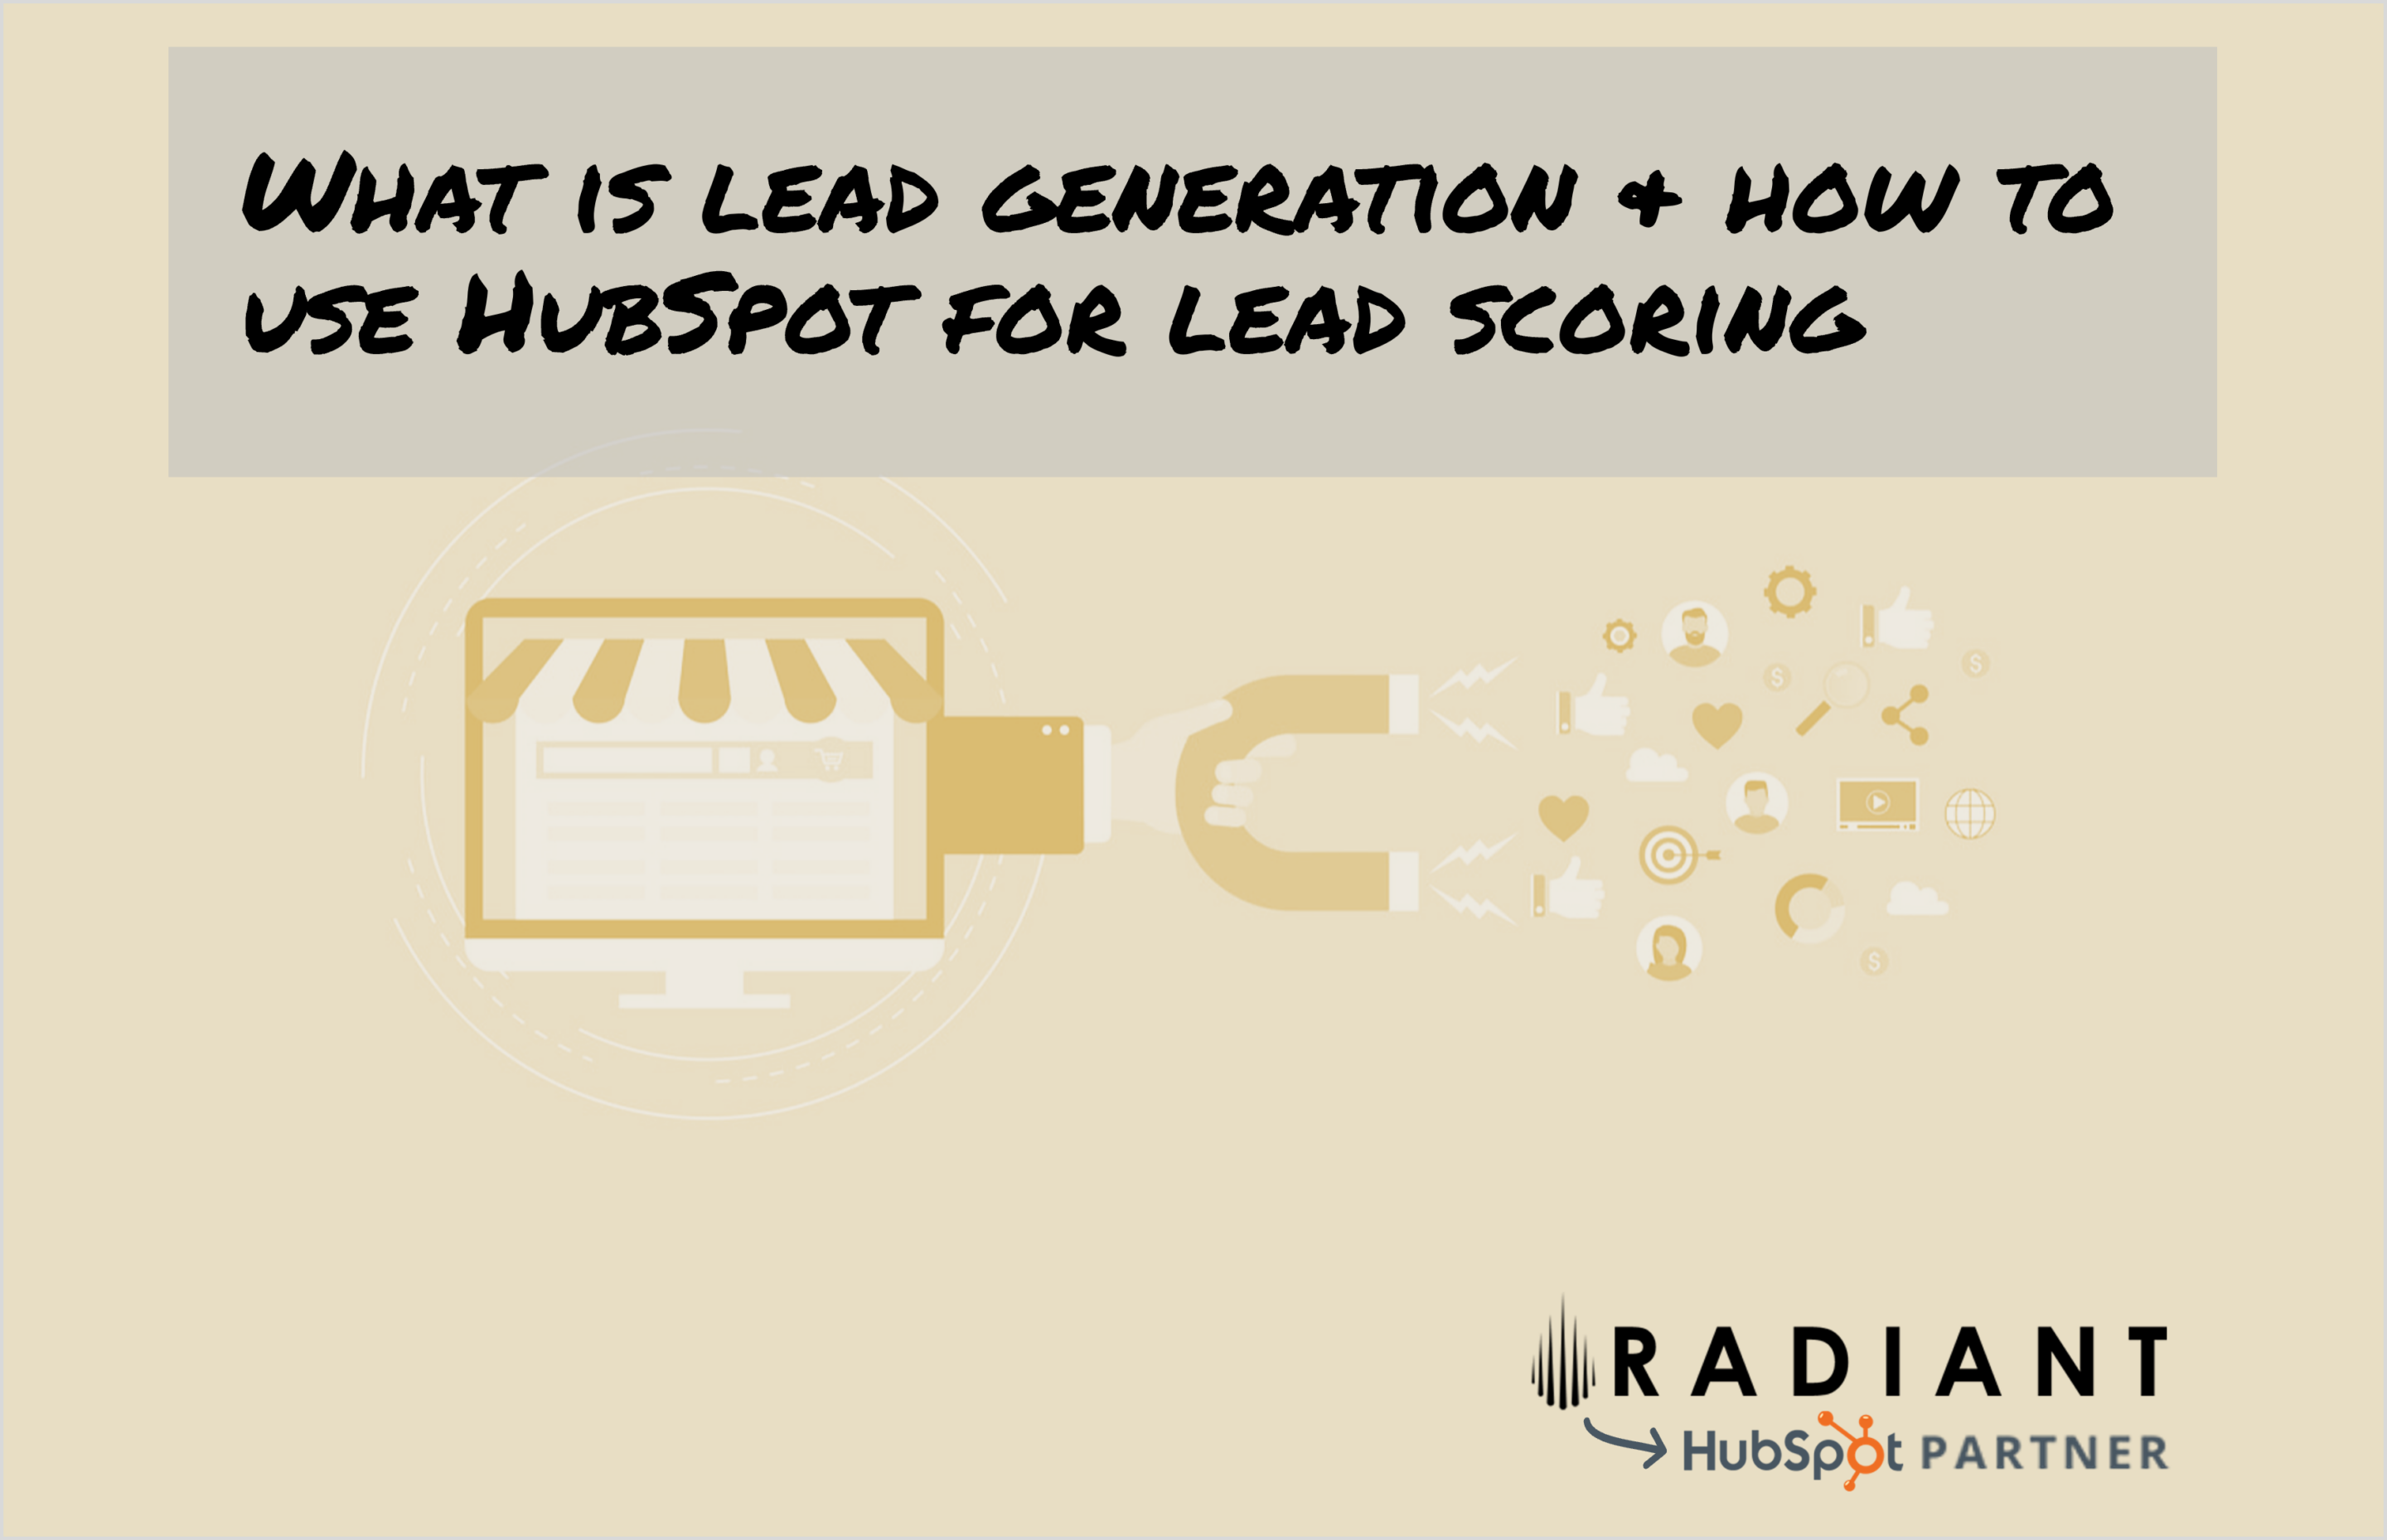 Learn from certified HubSpot Platinum Partner Radiant. What is lead generation & how to use HubSpot for lead scoring